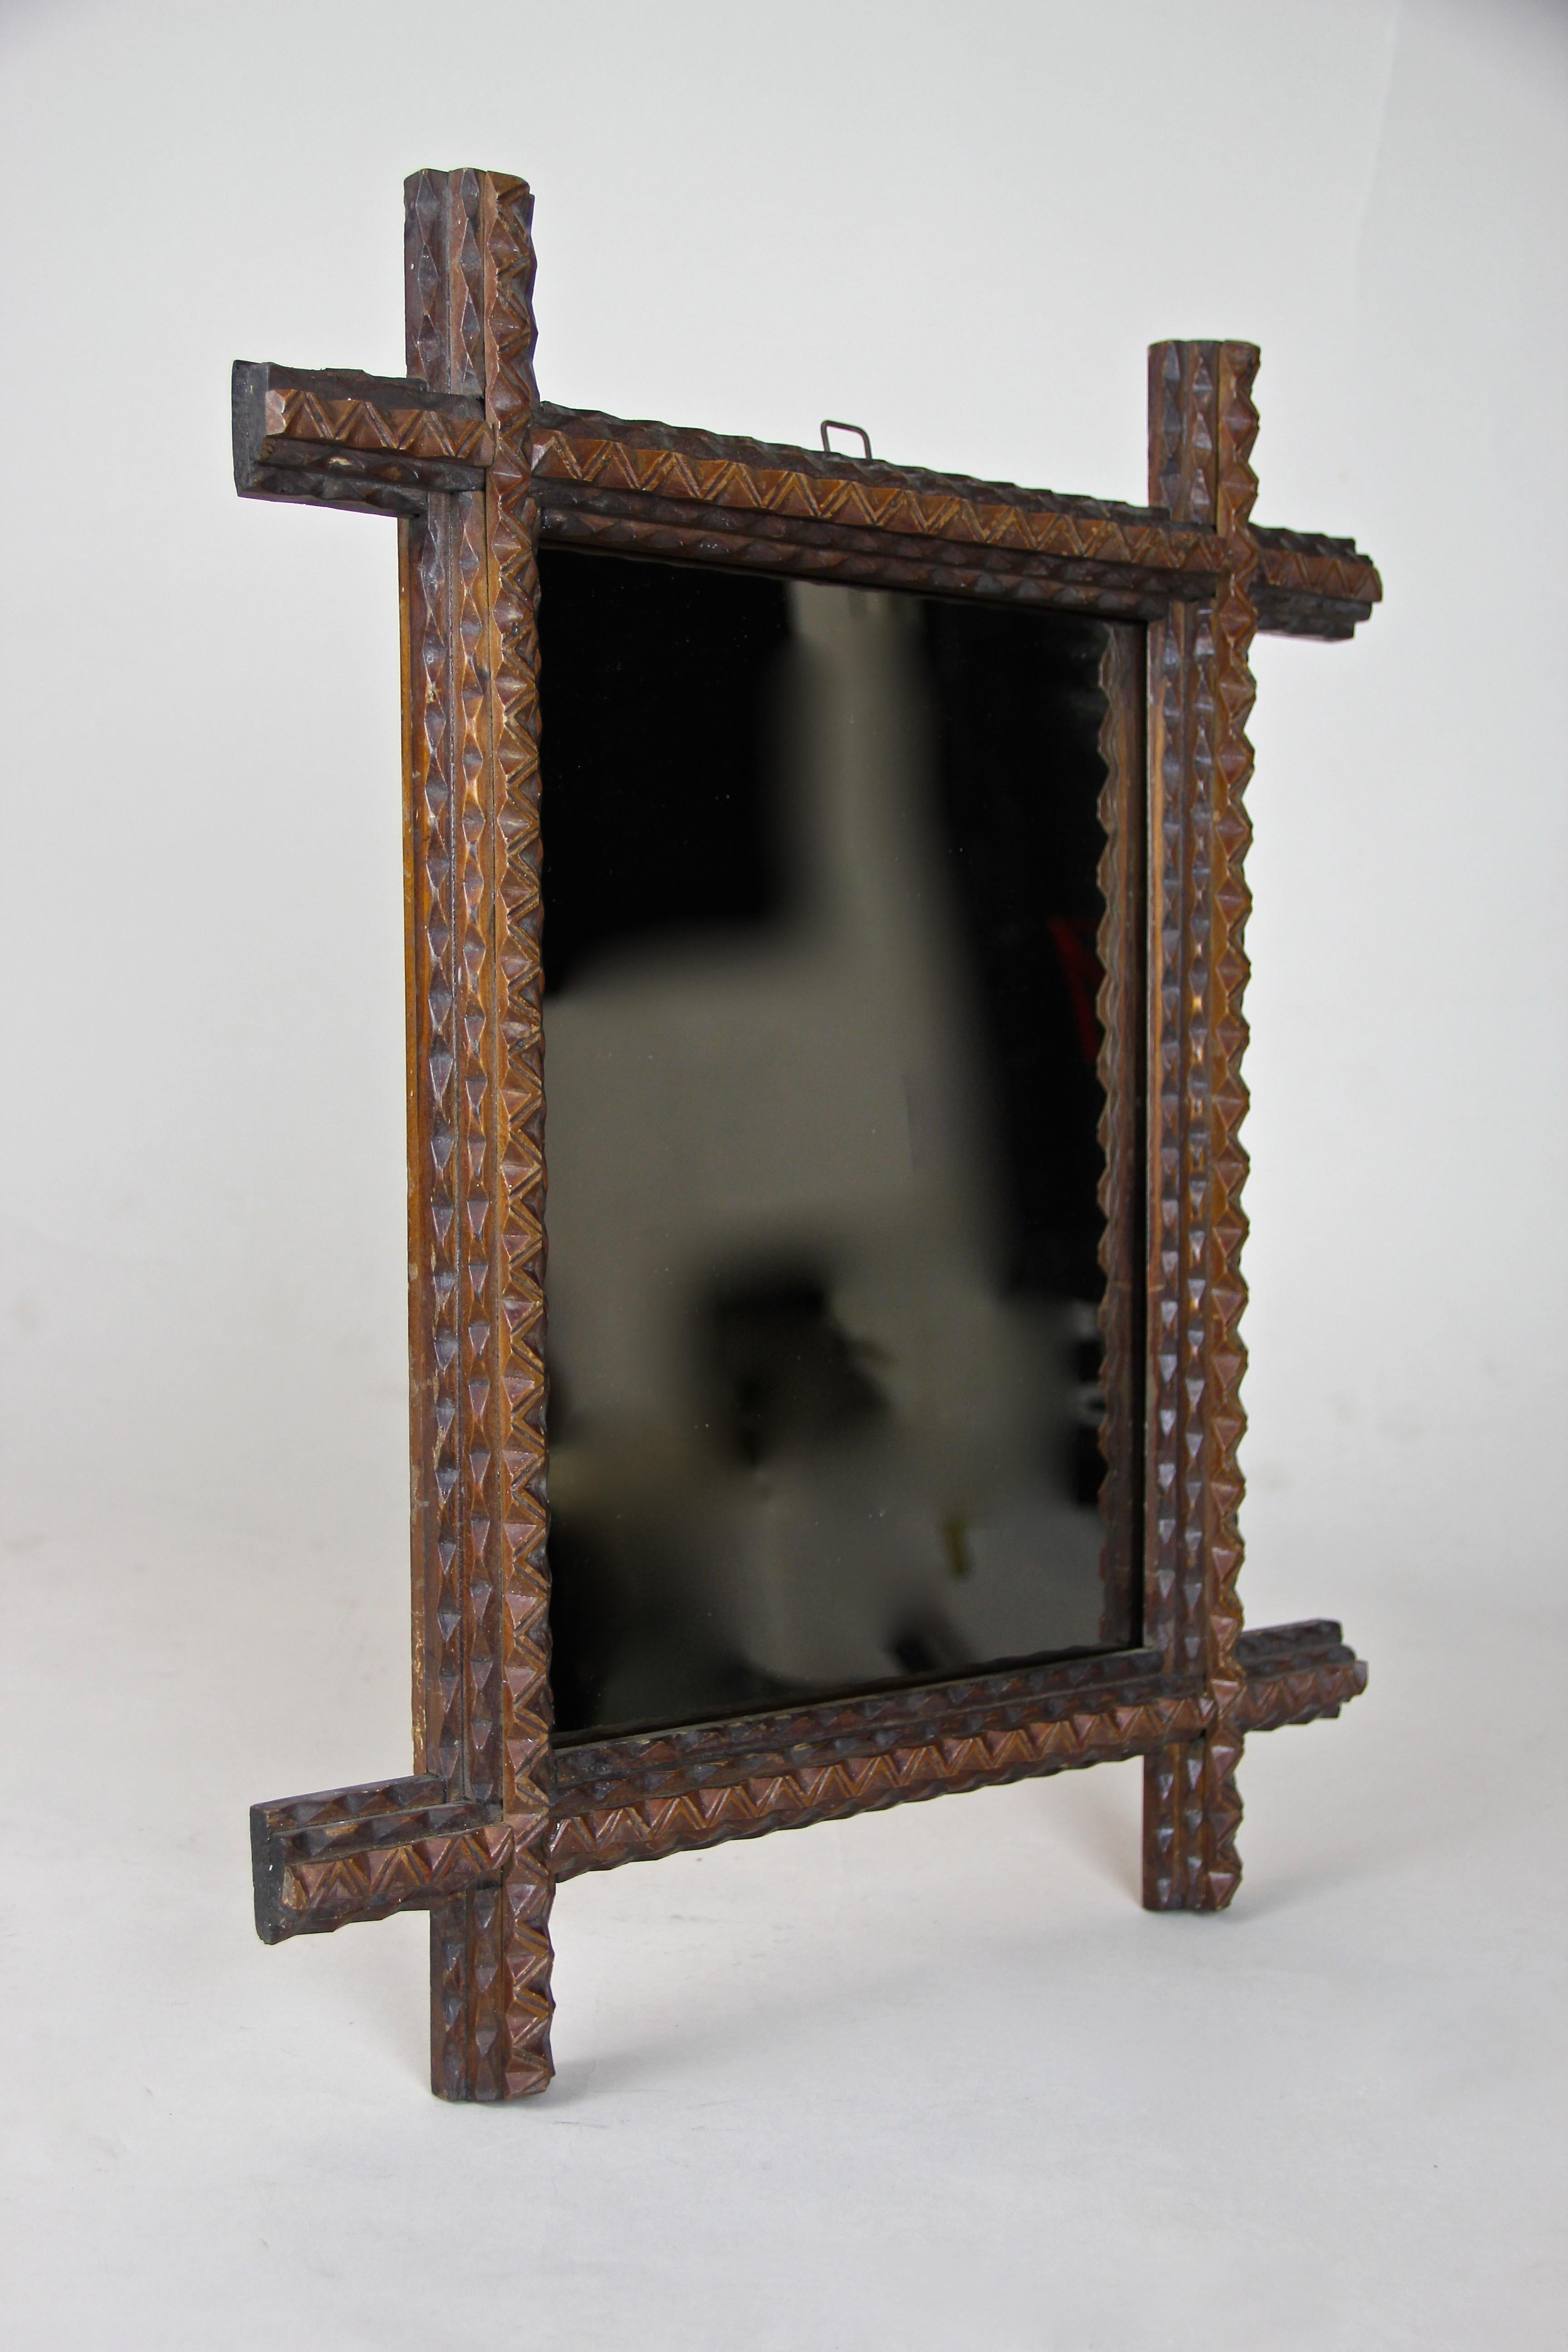 Beautiful small Tramp Art mirror from the late 19th century in Austria. Coming with a straight shape this wall mirror features the traditional pyramid-carved Tramp Art style out of basswood. The mirror glass had to be changed during restoration and